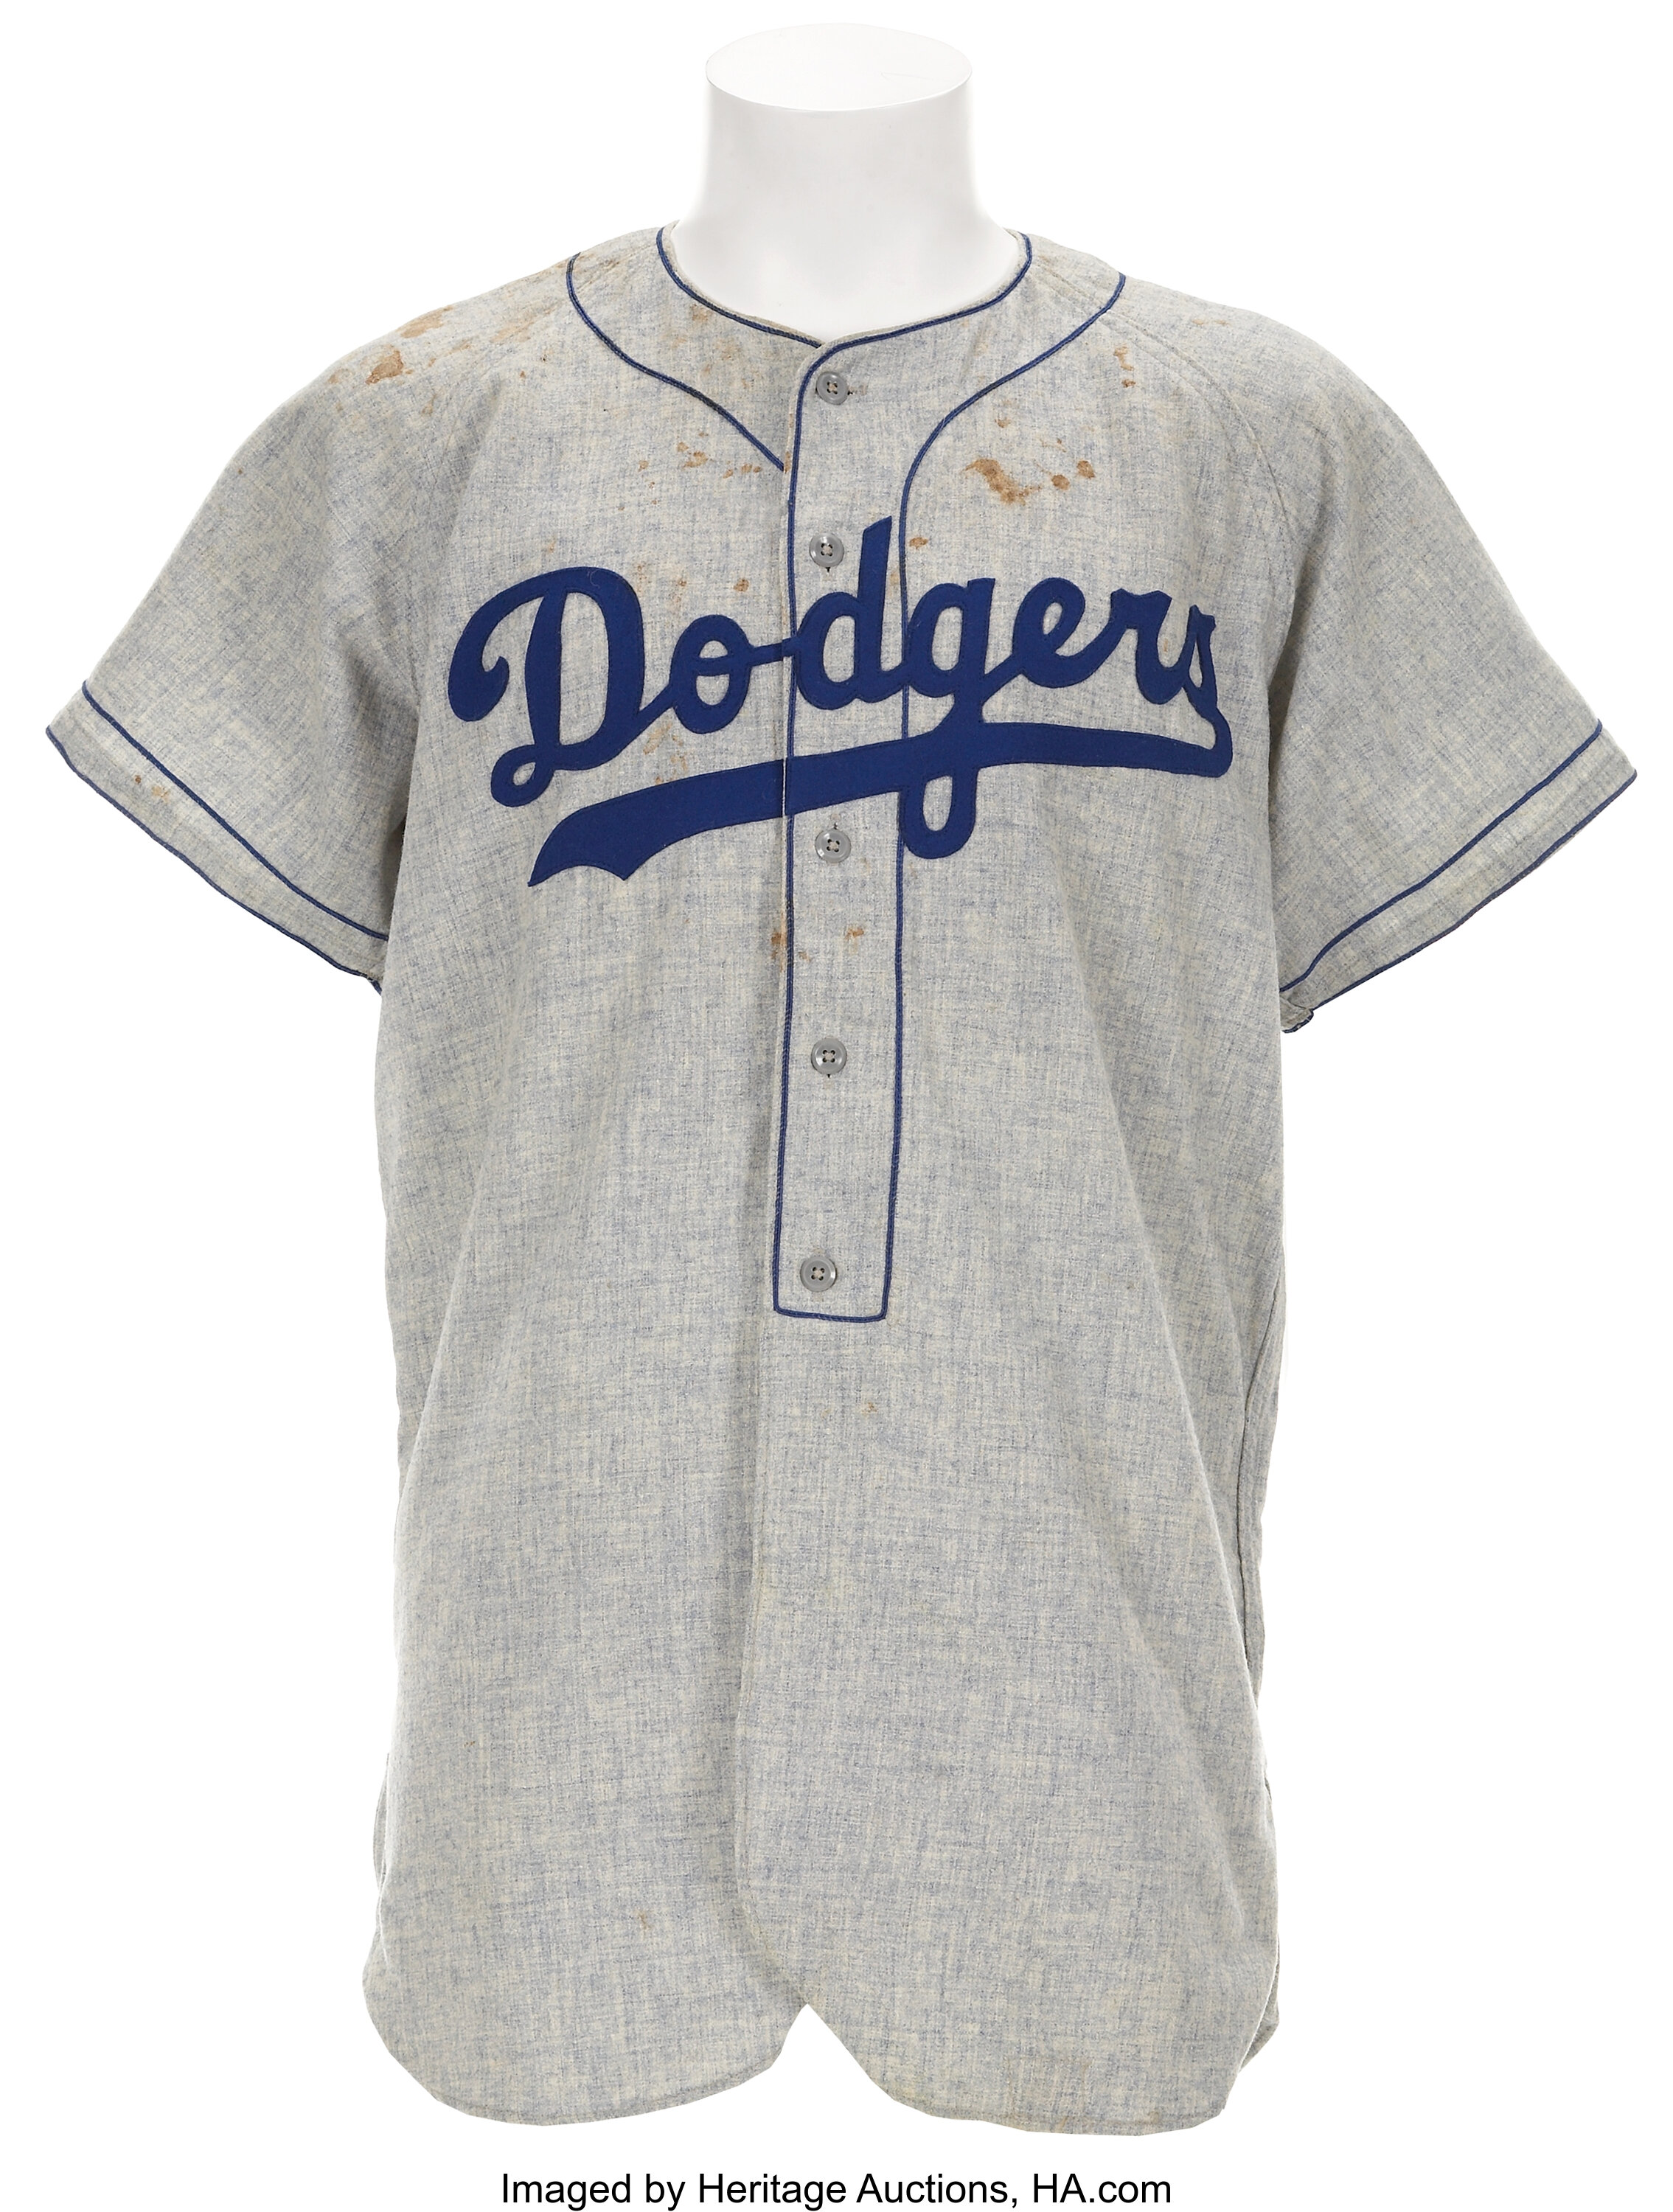 1952 Brooklyn Dodgers Game-Used #33 Jersey